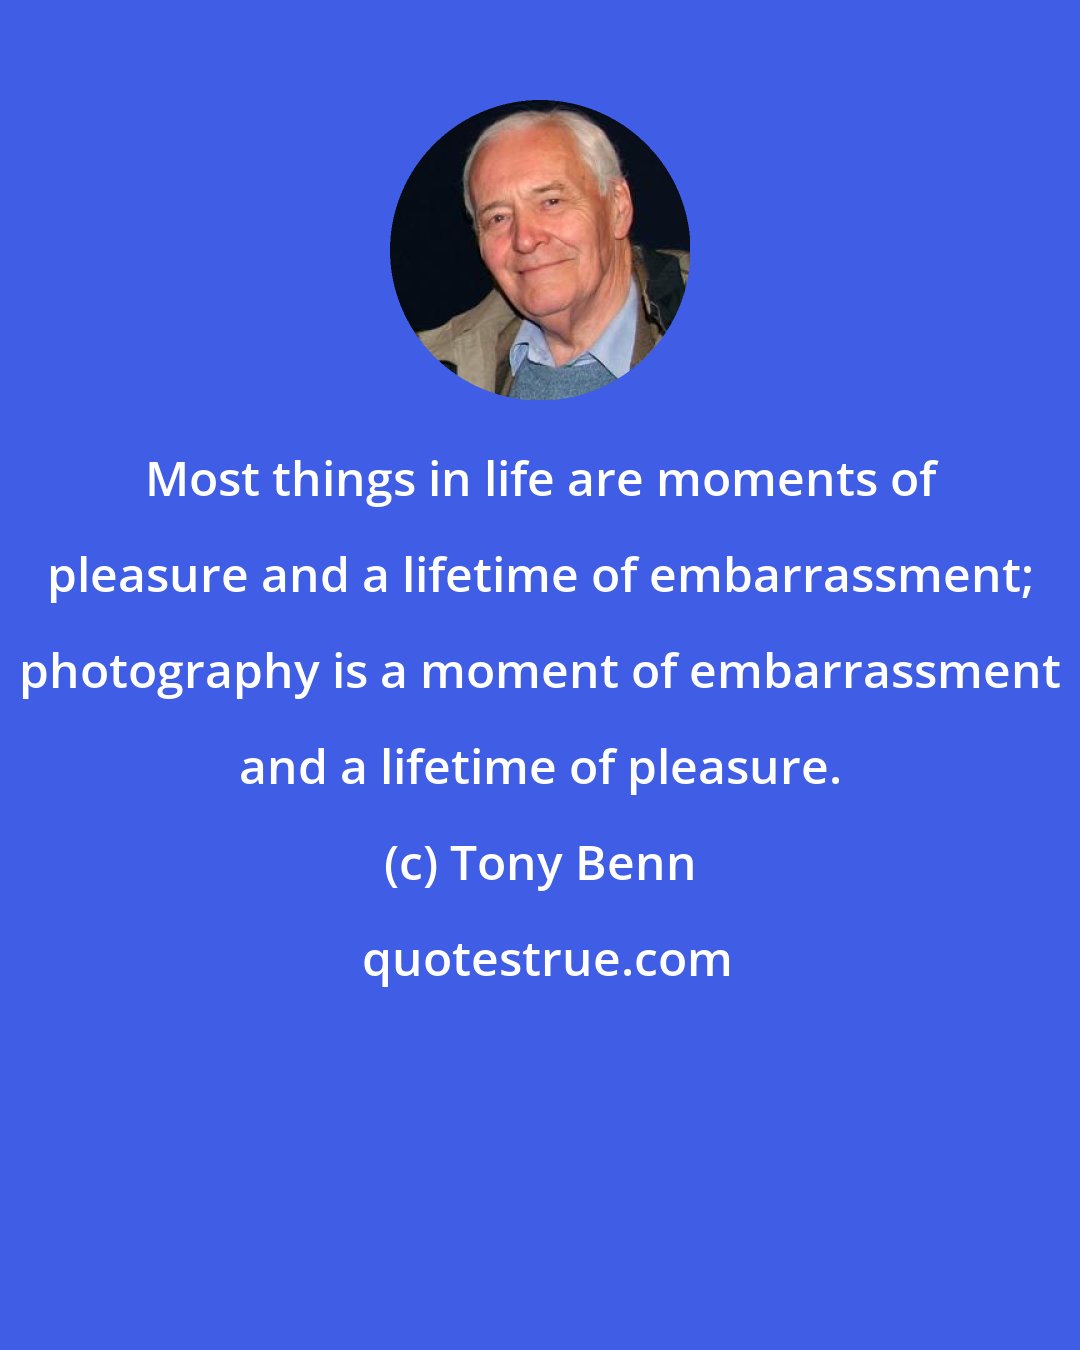 Tony Benn: Most things in life are moments of pleasure and a lifetime of embarrassment; photography is a moment of embarrassment and a lifetime of pleasure.